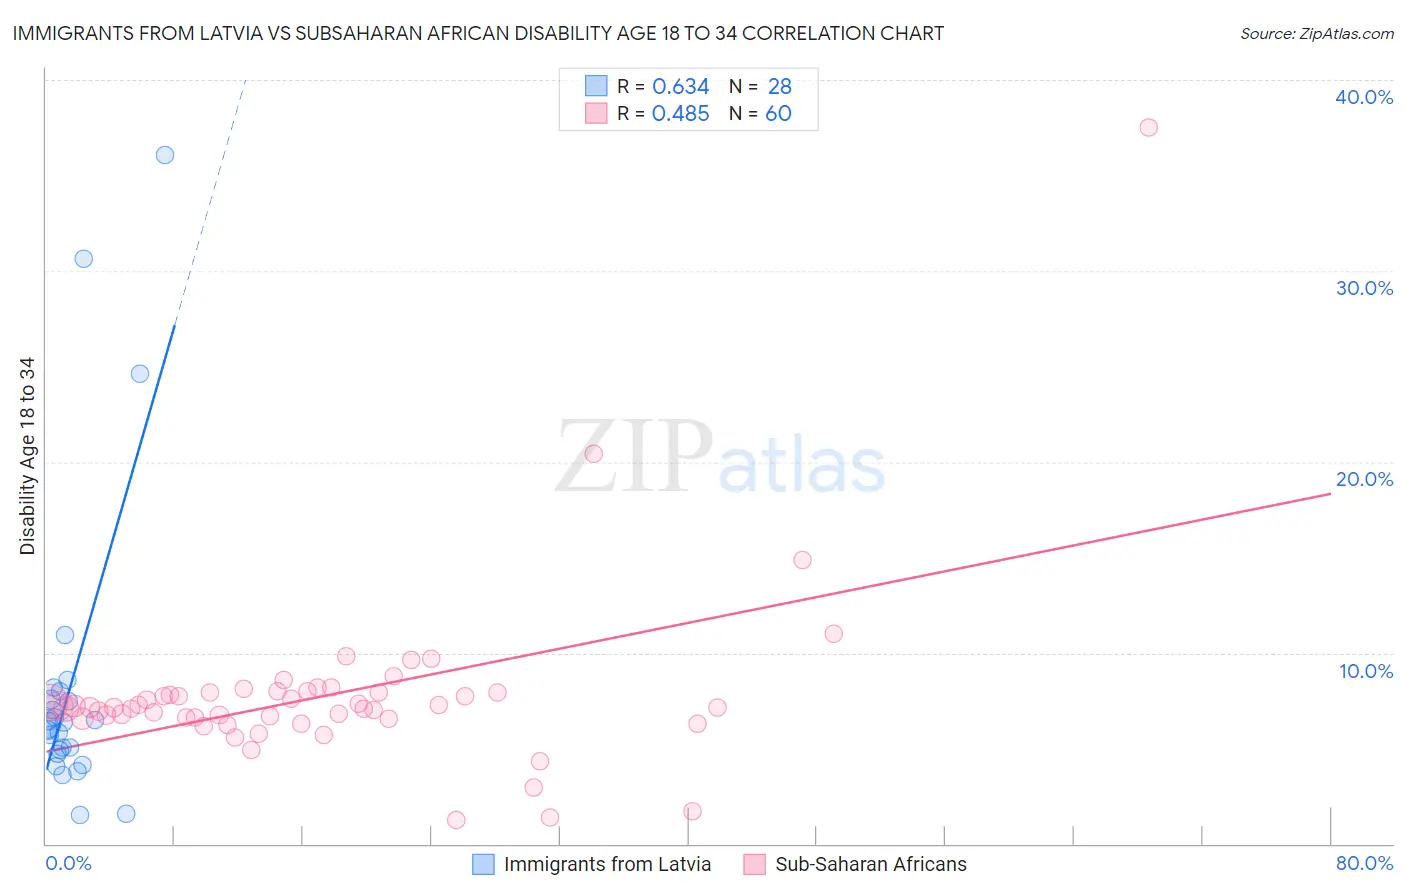 Immigrants from Latvia vs Subsaharan African Disability Age 18 to 34